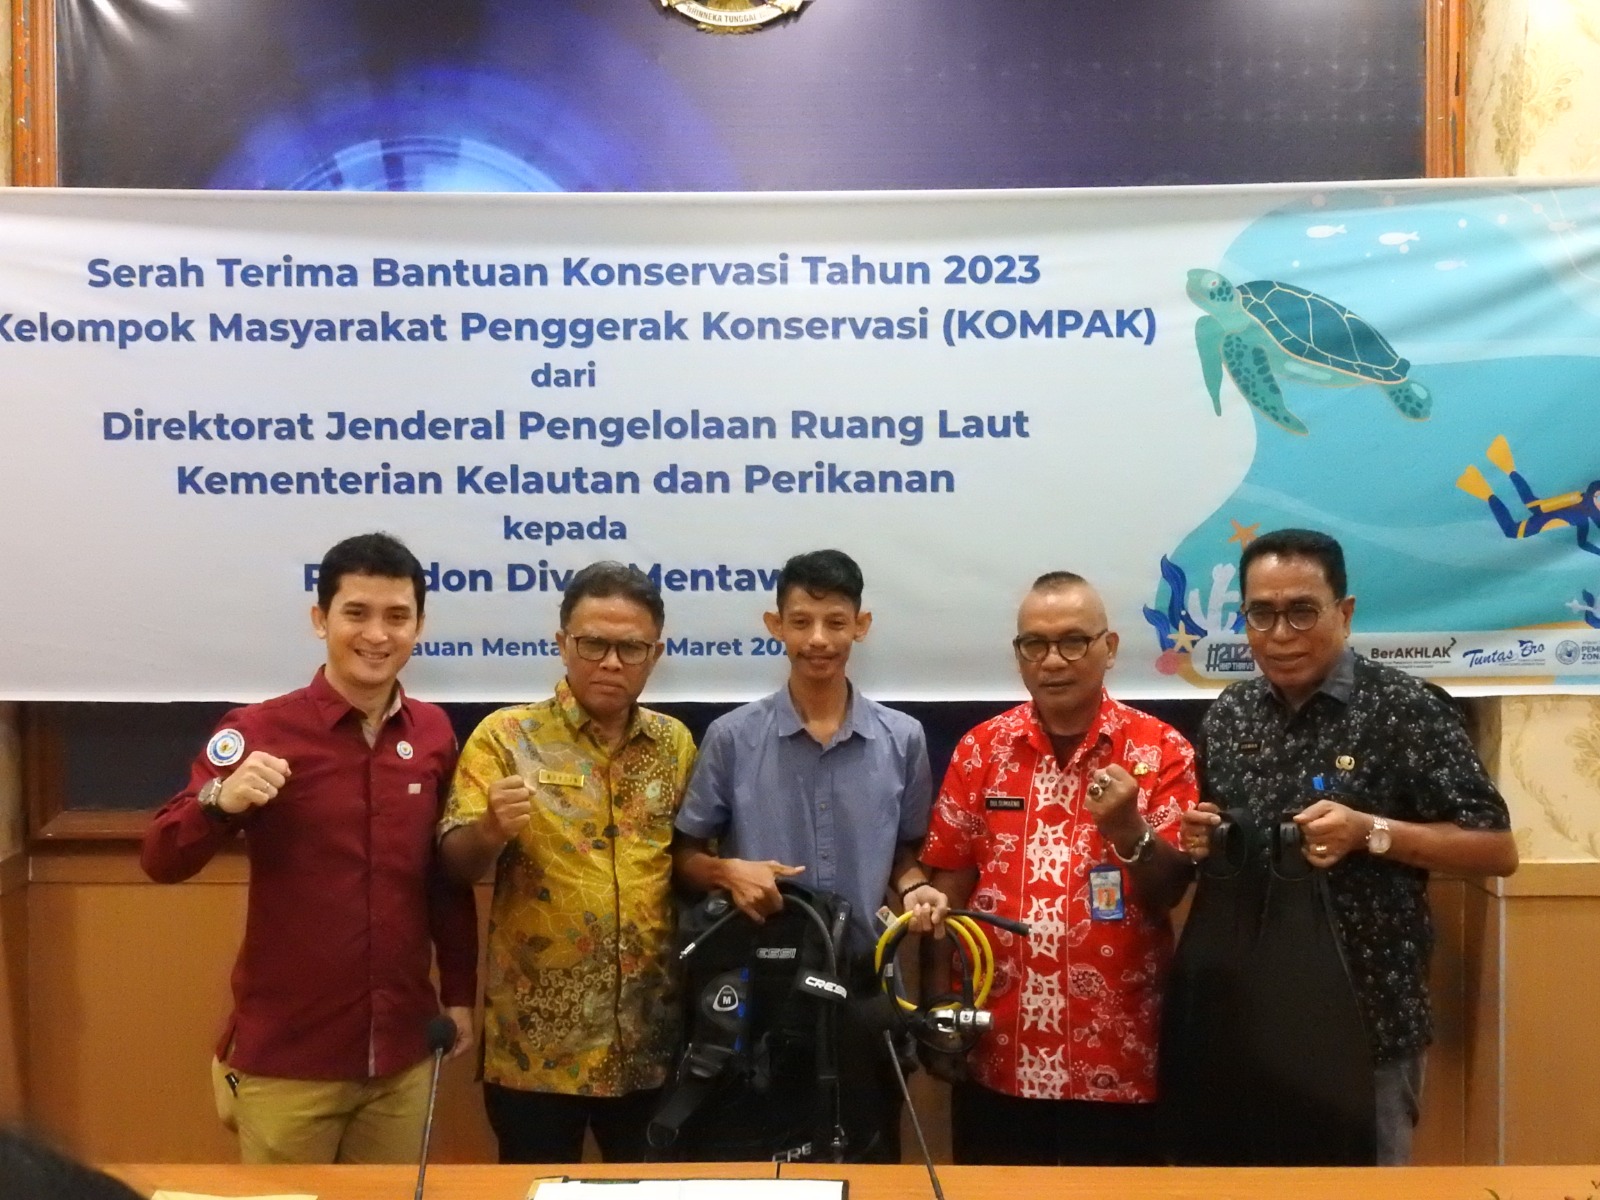 How to achieve 10% marine protected areas in Indonesia zonaebt.com